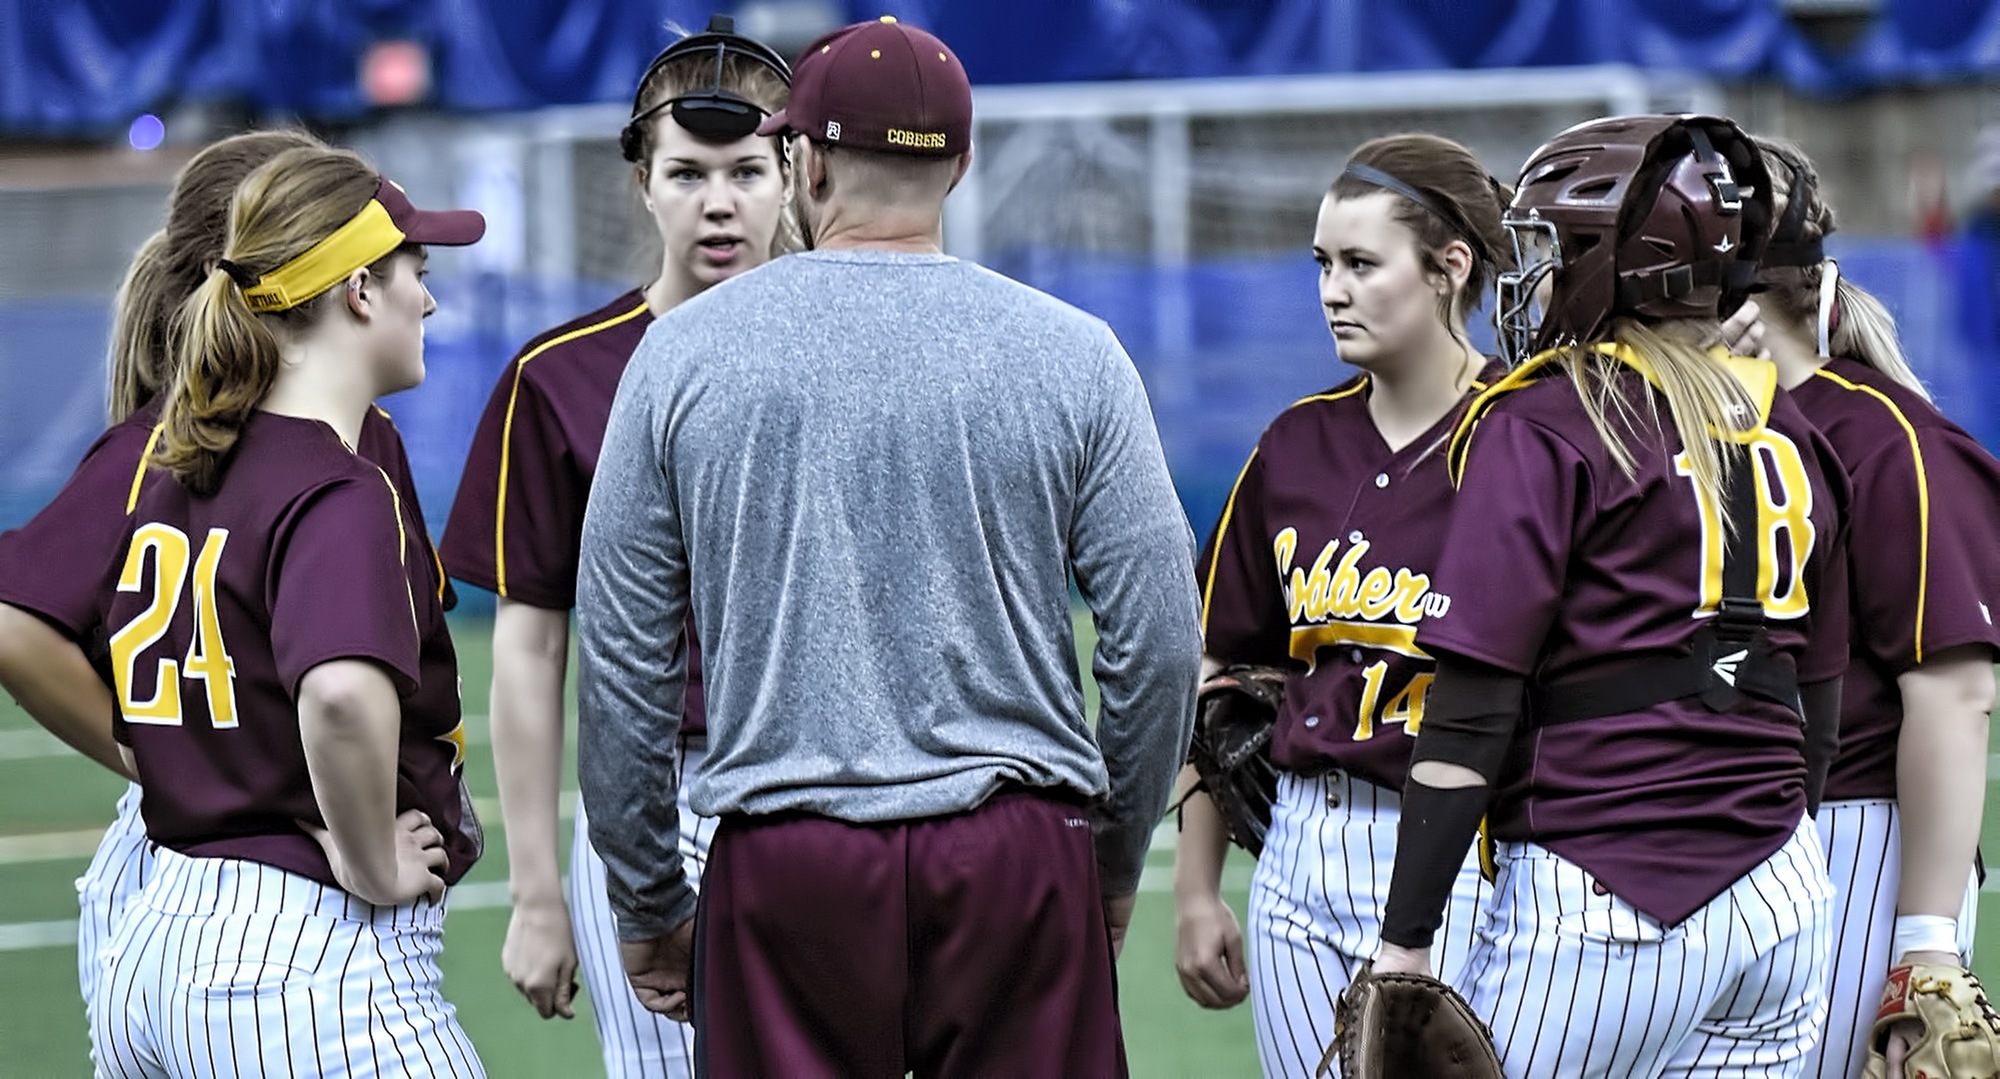 The Cobber softball team dropped a pair of games at Augsburg in the MIAC opener.